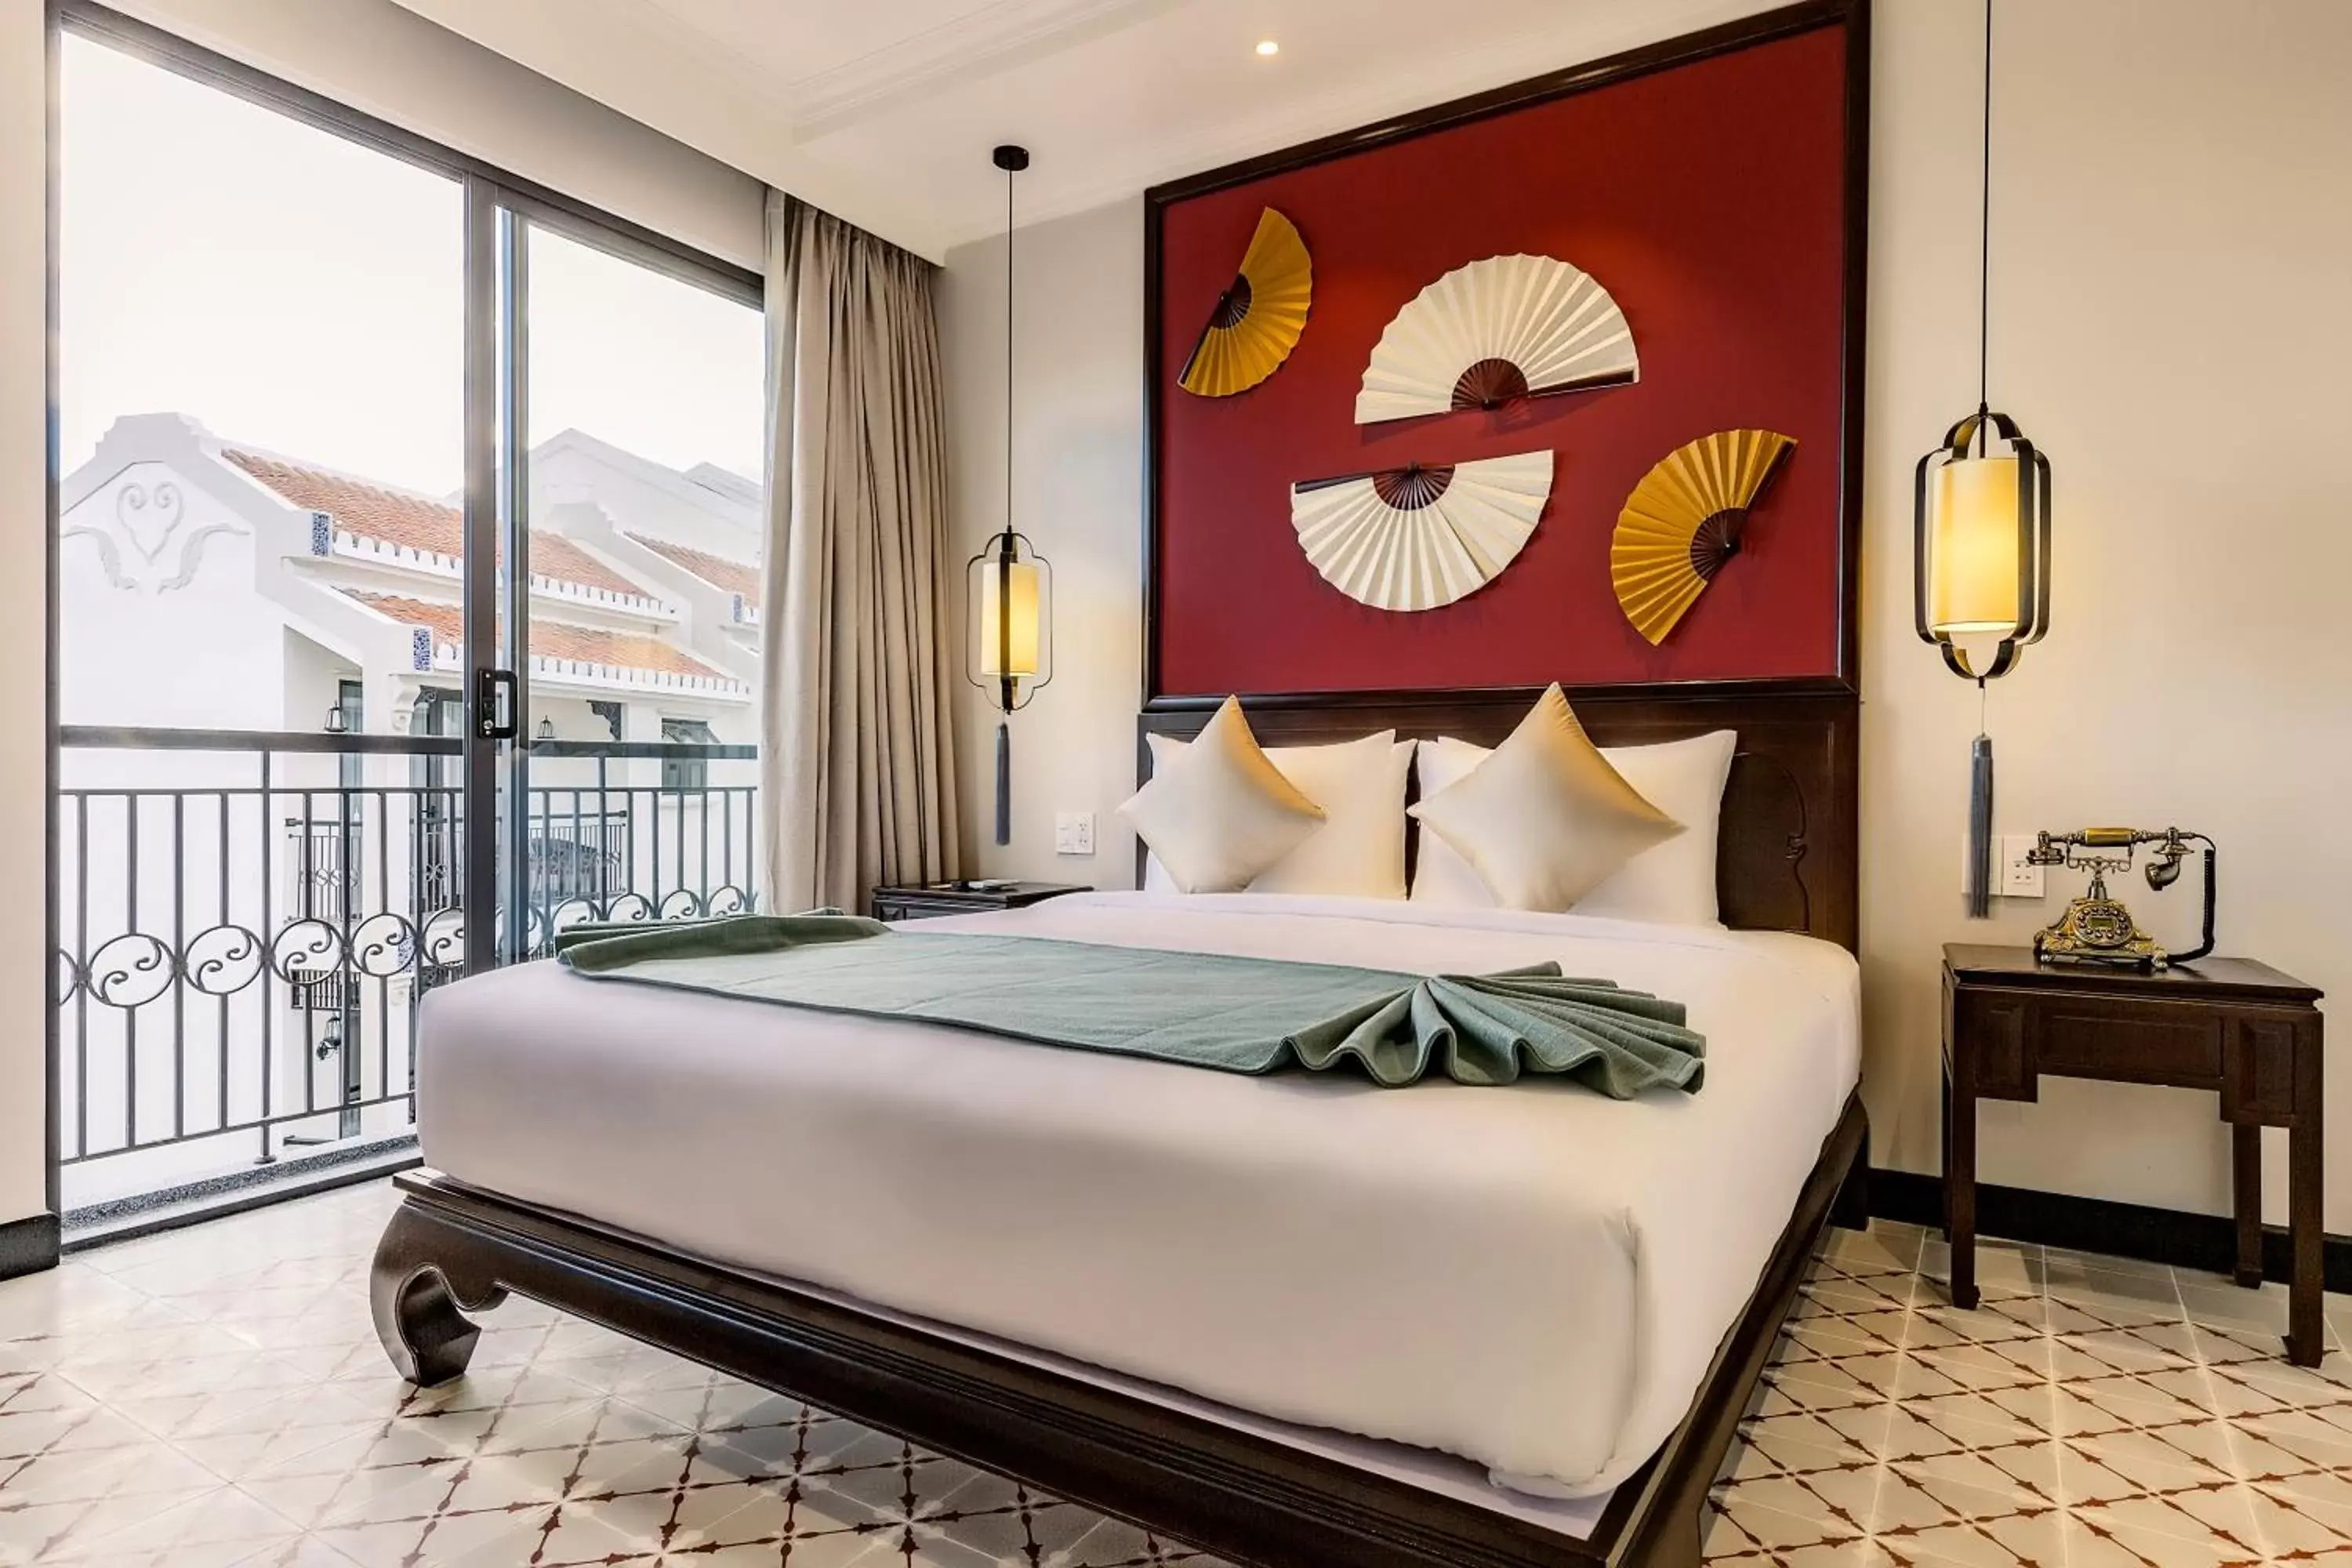 Deluxe Double Room with Pool View in Laluna Hoi An Riverside Hotel & Spa